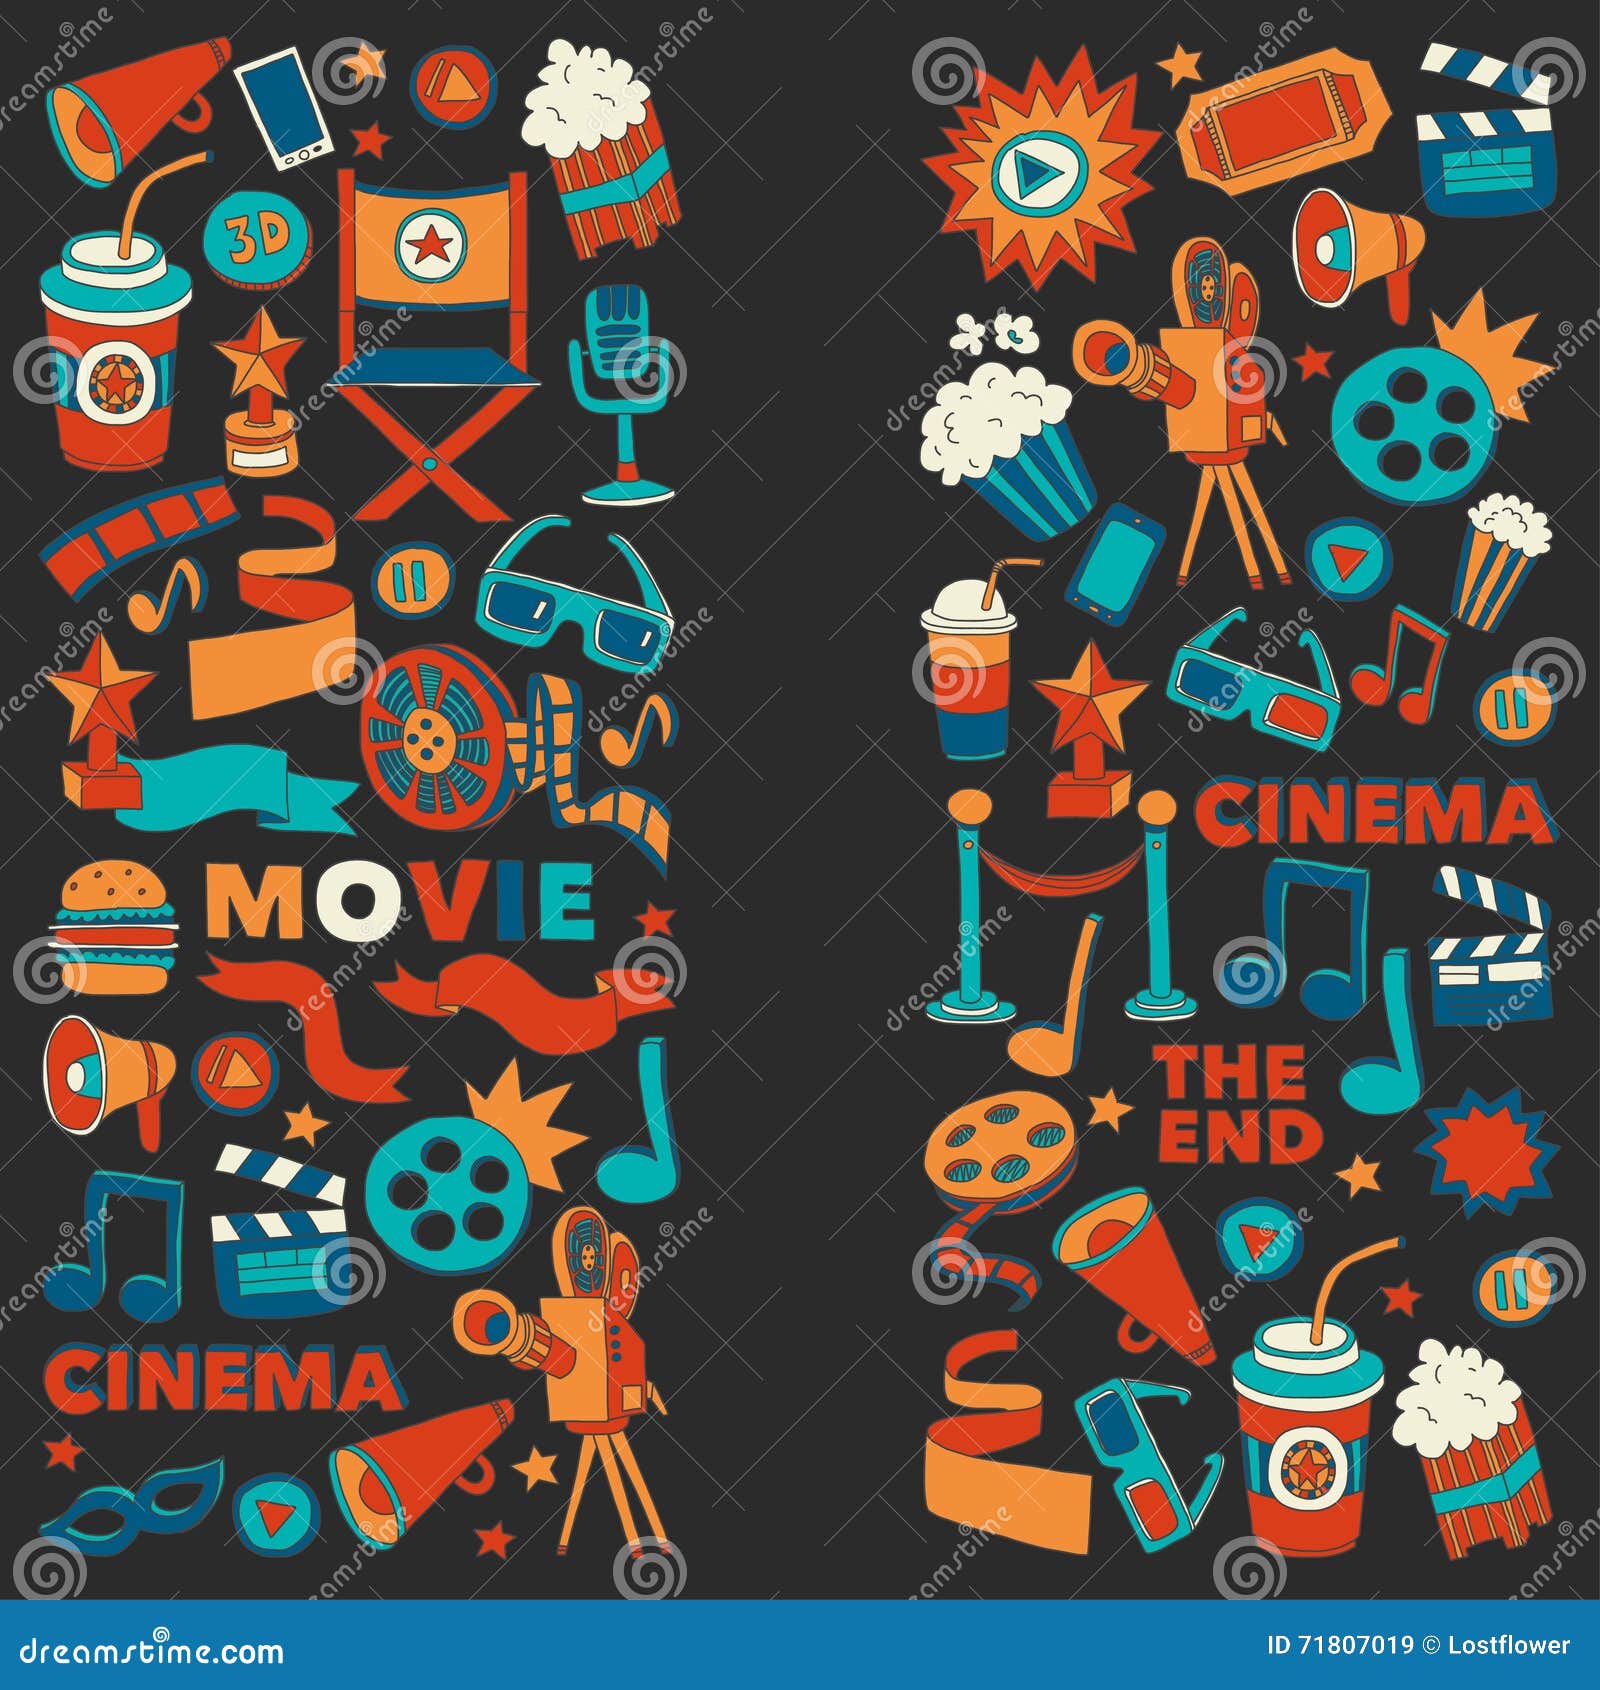  pattern with cinema hand drawn icons doodle style